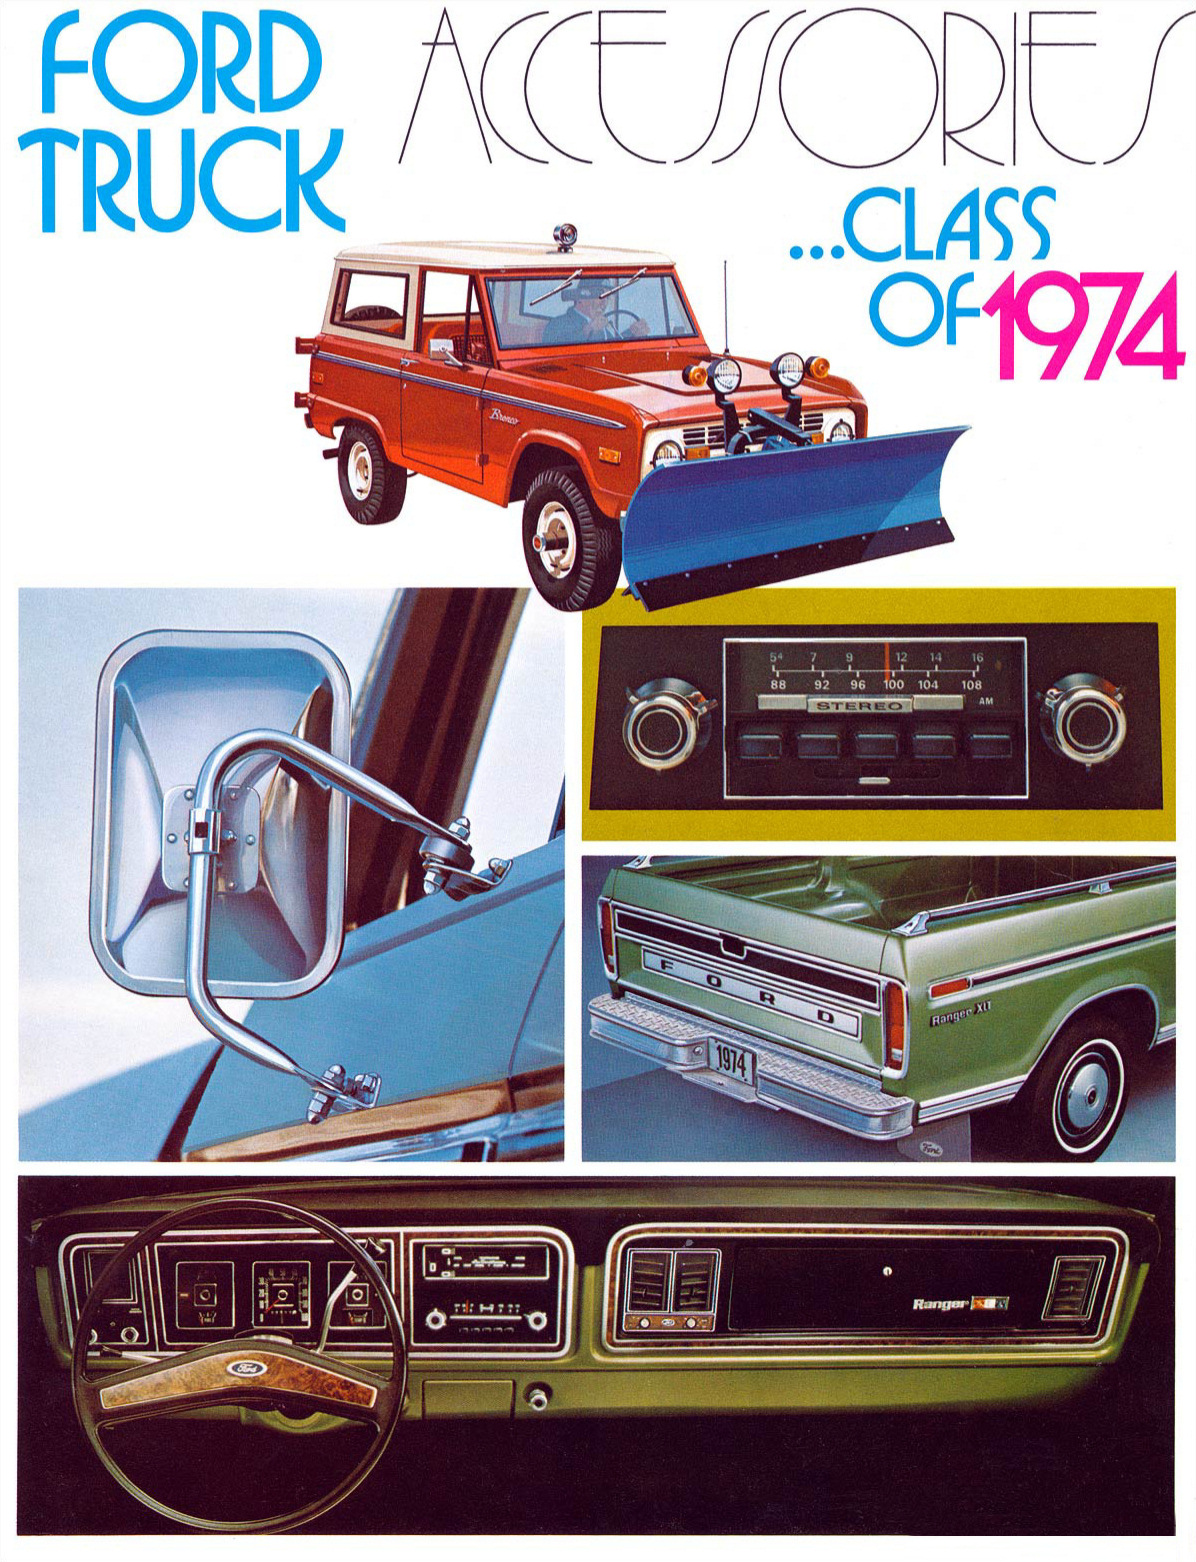 1974_Ford_Triuck_Accessories-01